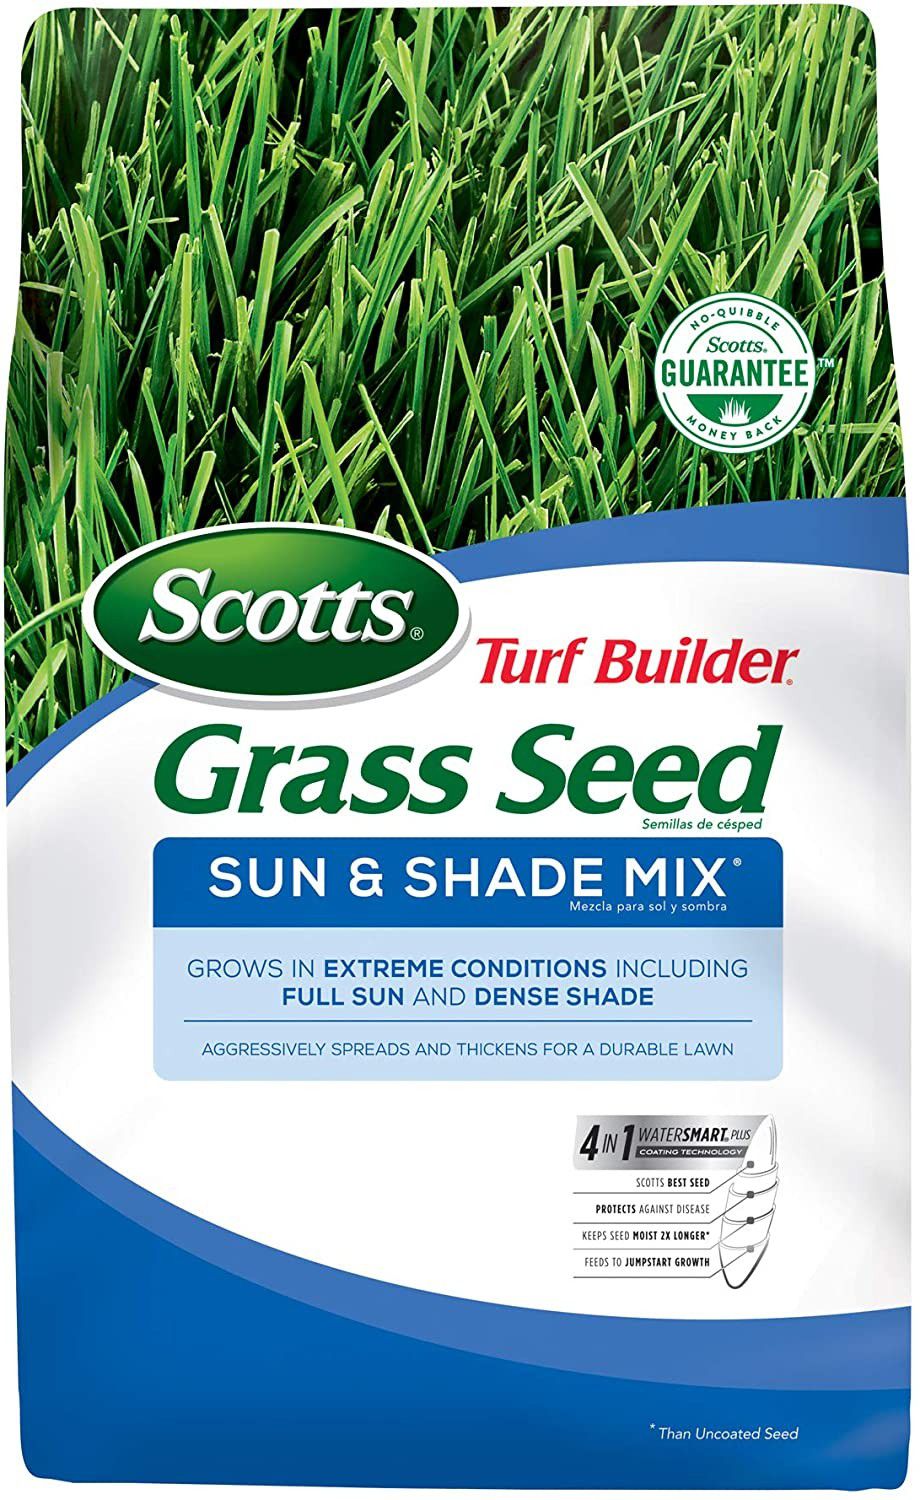 Scotts Turf Builder Grass Seed Sun & Shade Mix - Shade & Drought Resistant Grass Seed for Lawns 7lb